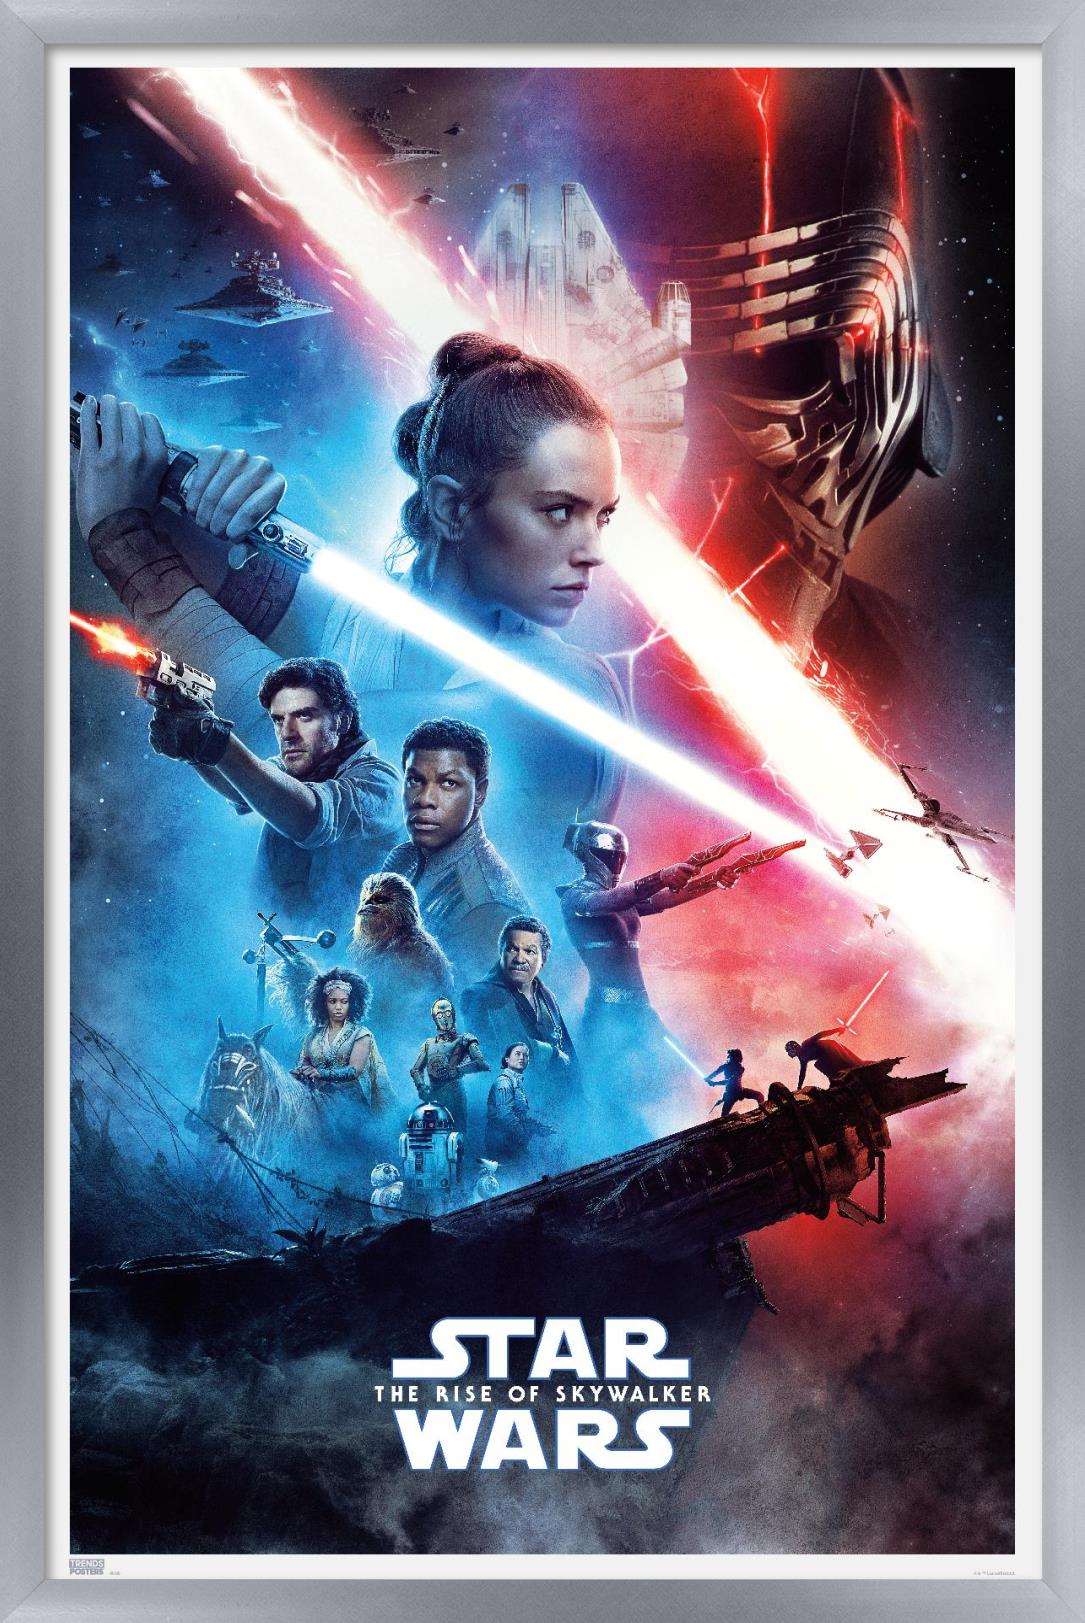 Star Wars: The Rise Of Skywalker - Official One Sheet Wall Poster, 14.725" x 22.375", Framed - image 1 of 1